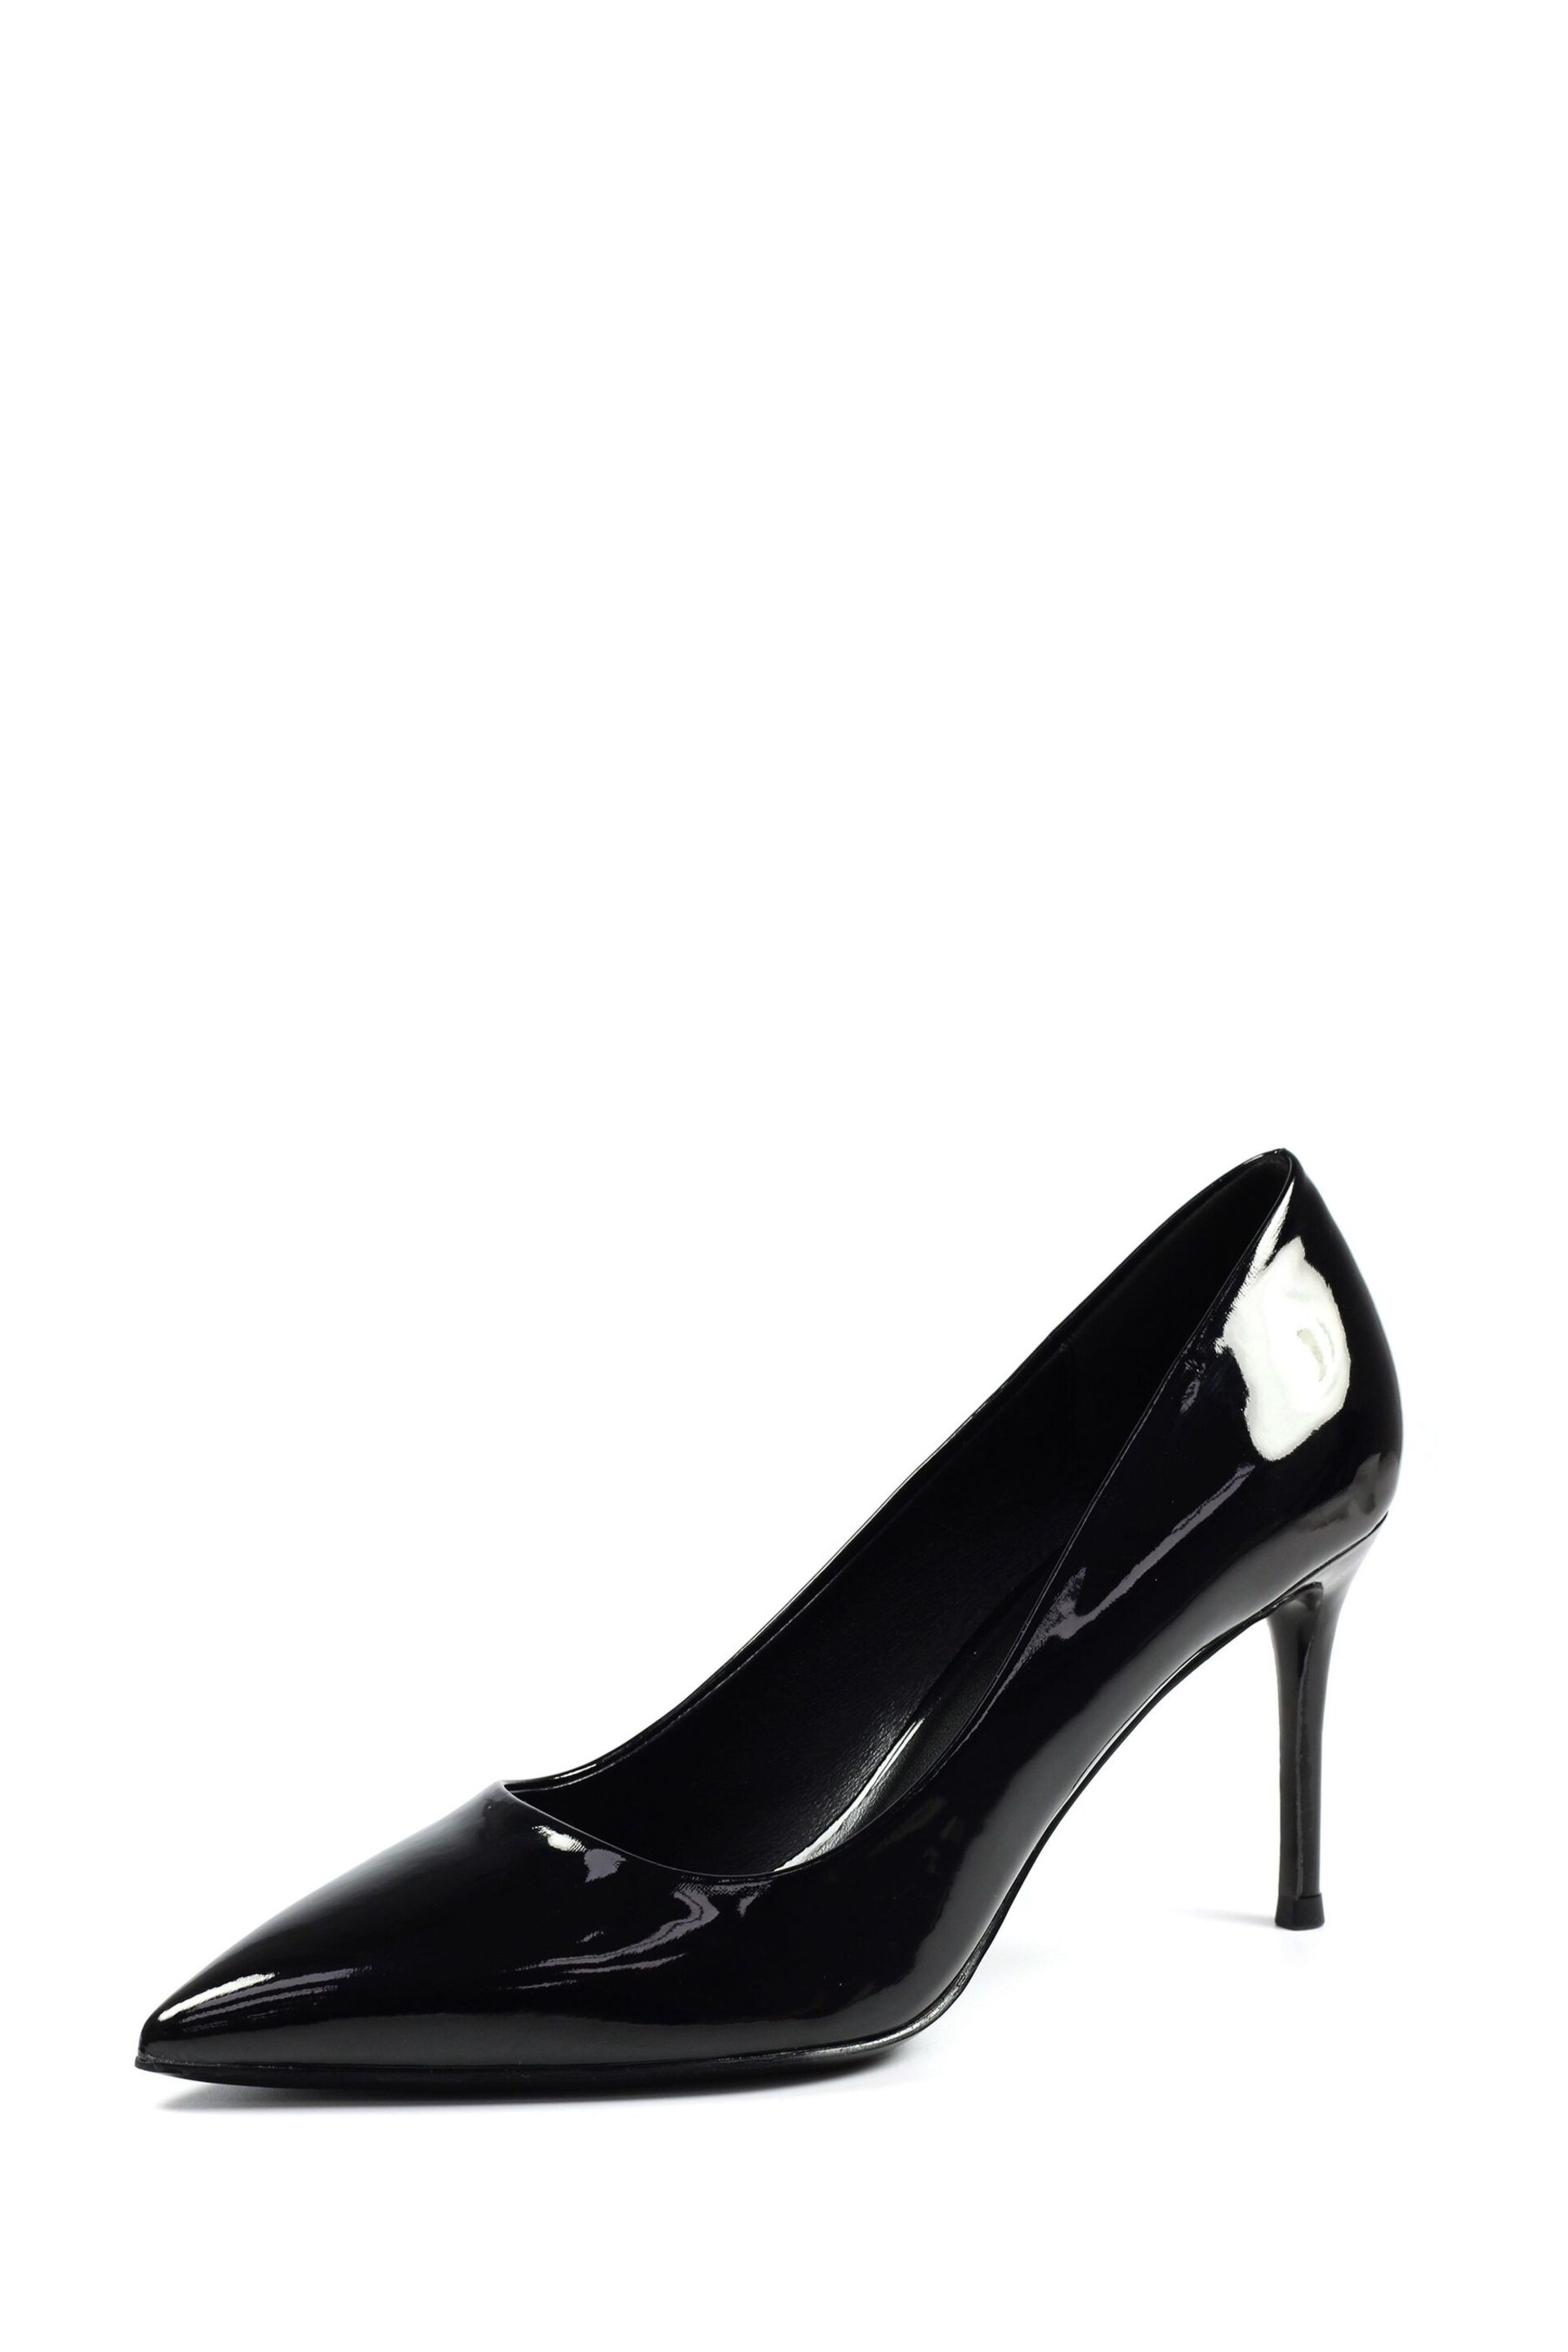 Lunar Moscow Heeled Court Shoes - Image 4 of 8